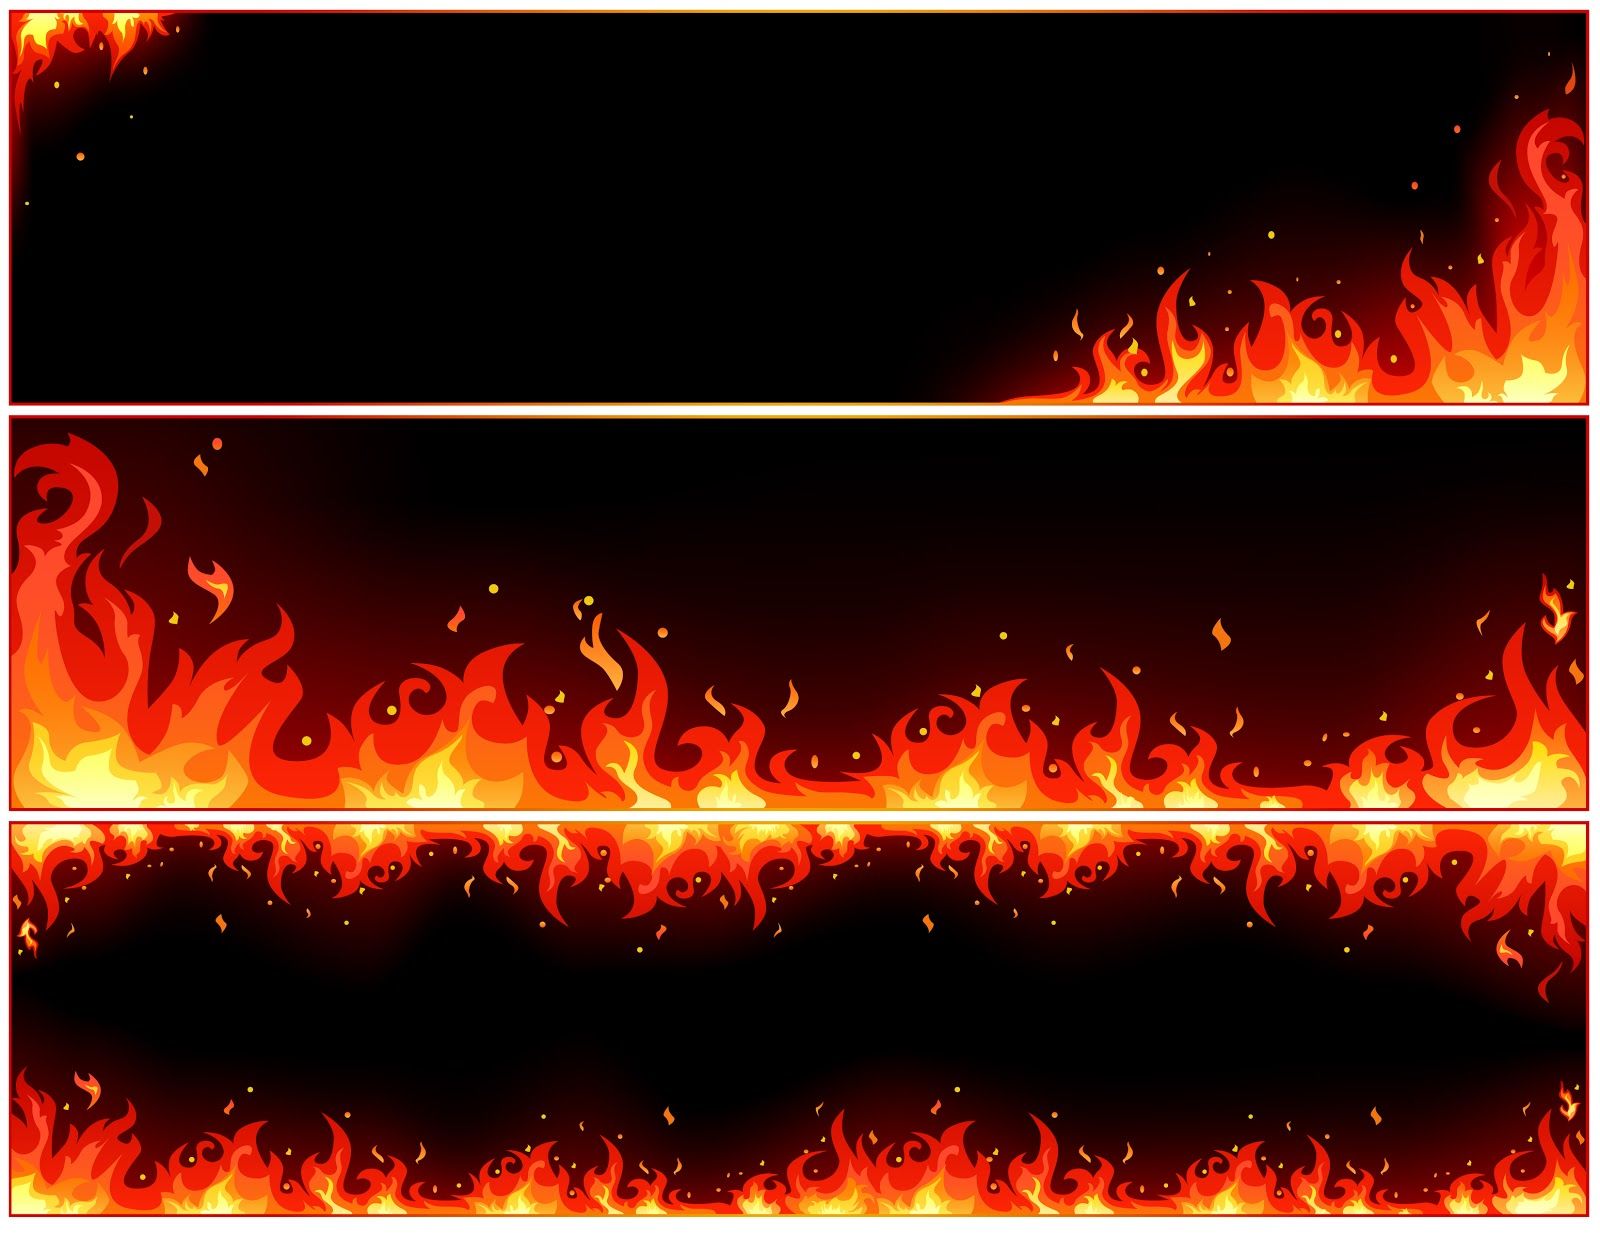 Free Fire Banner For Youtube HD, How To Make A Gaming Channel Banner Free Fire Gaming Channel Banner Garena Free Fire Ssg Youtube / Looking for the best youtube banner wallpaper?